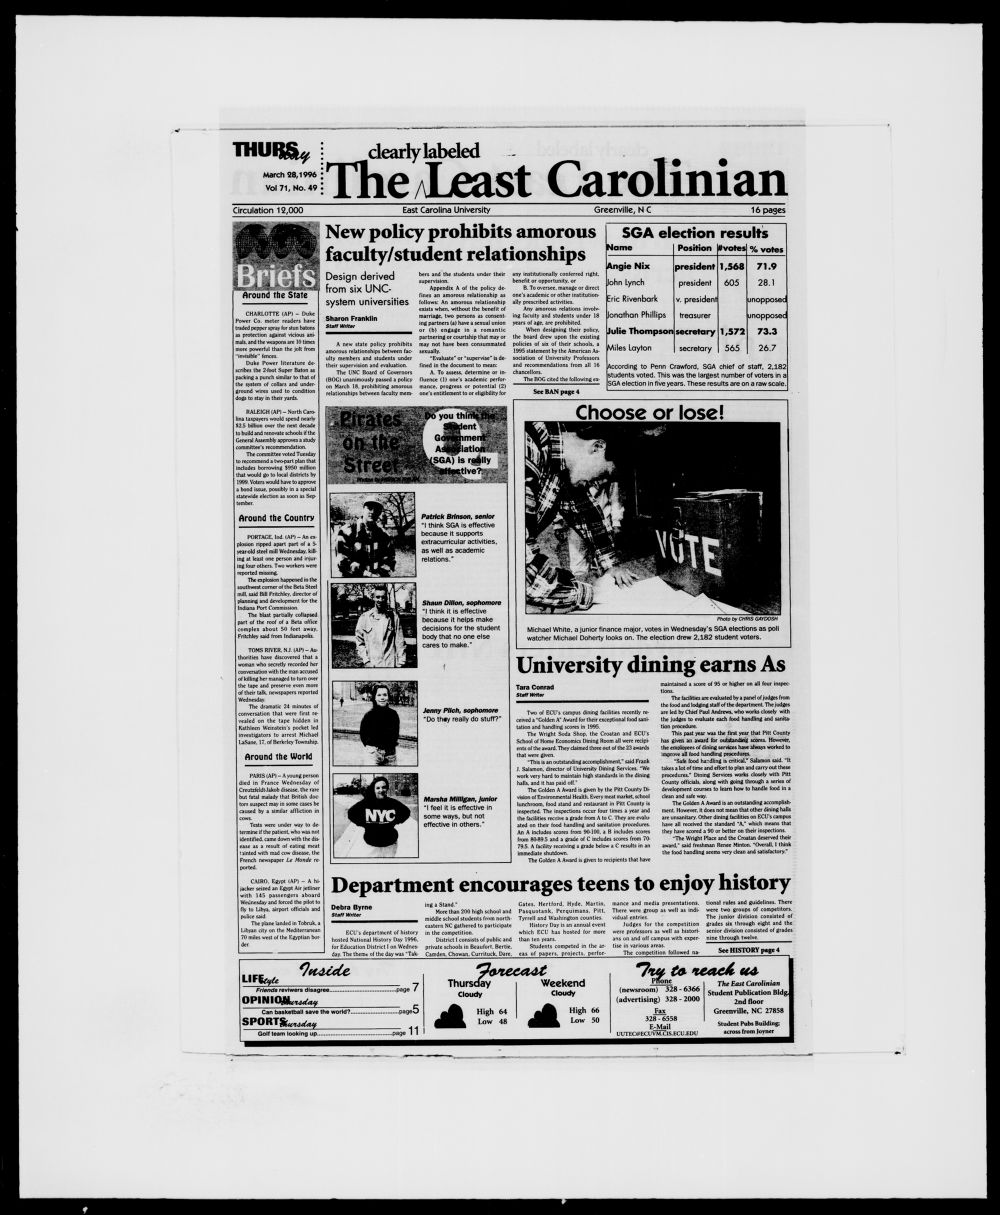 The East Carolinian, March 28, 1996 pic